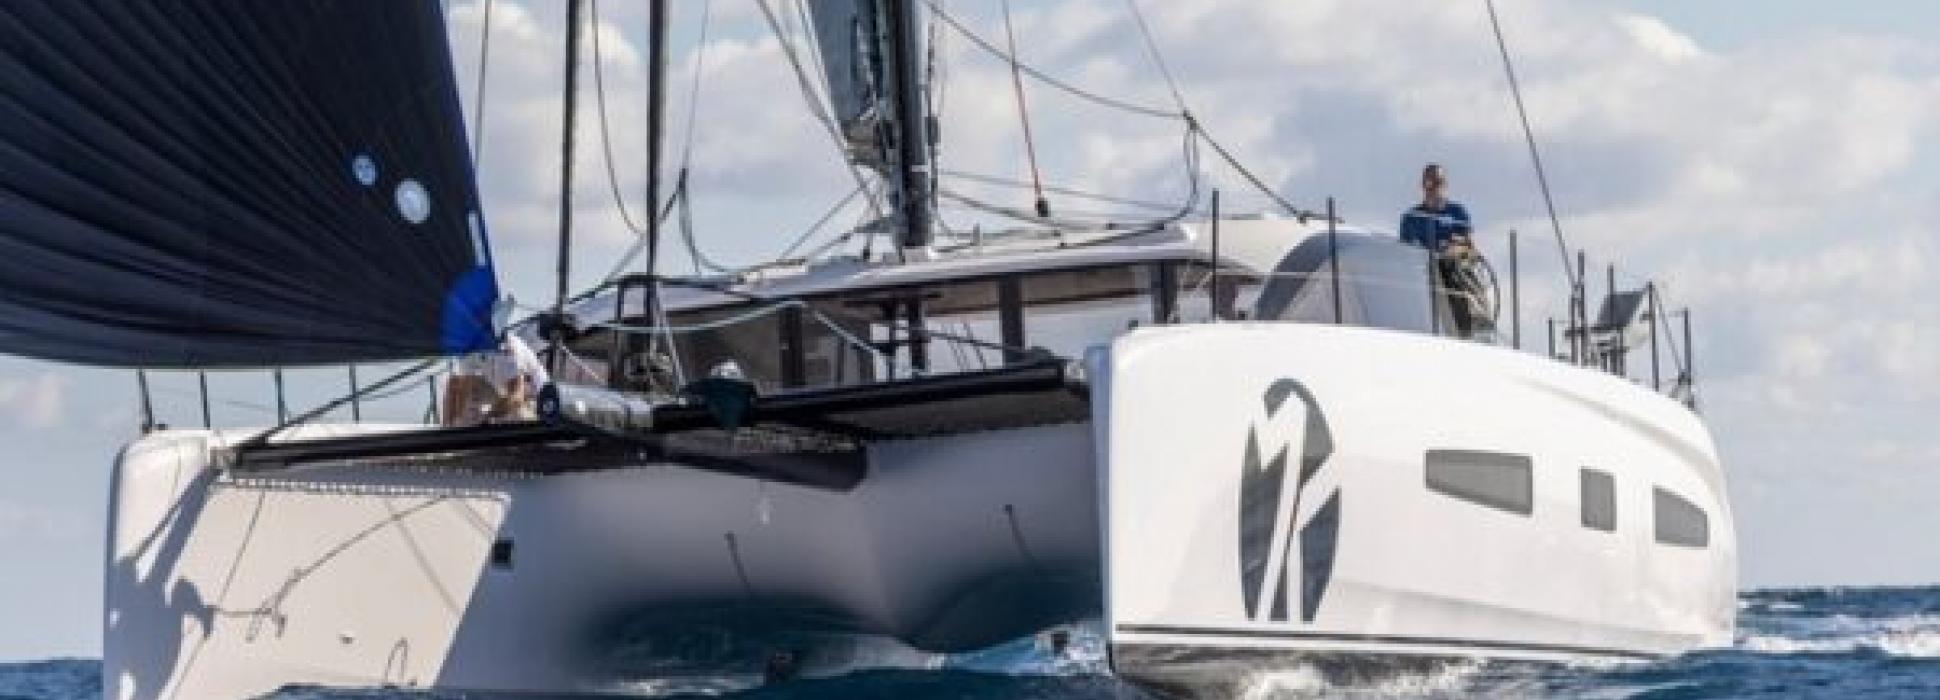 Grand Large Yachting is ranked among the 500 best companies with the highest growth rate in France